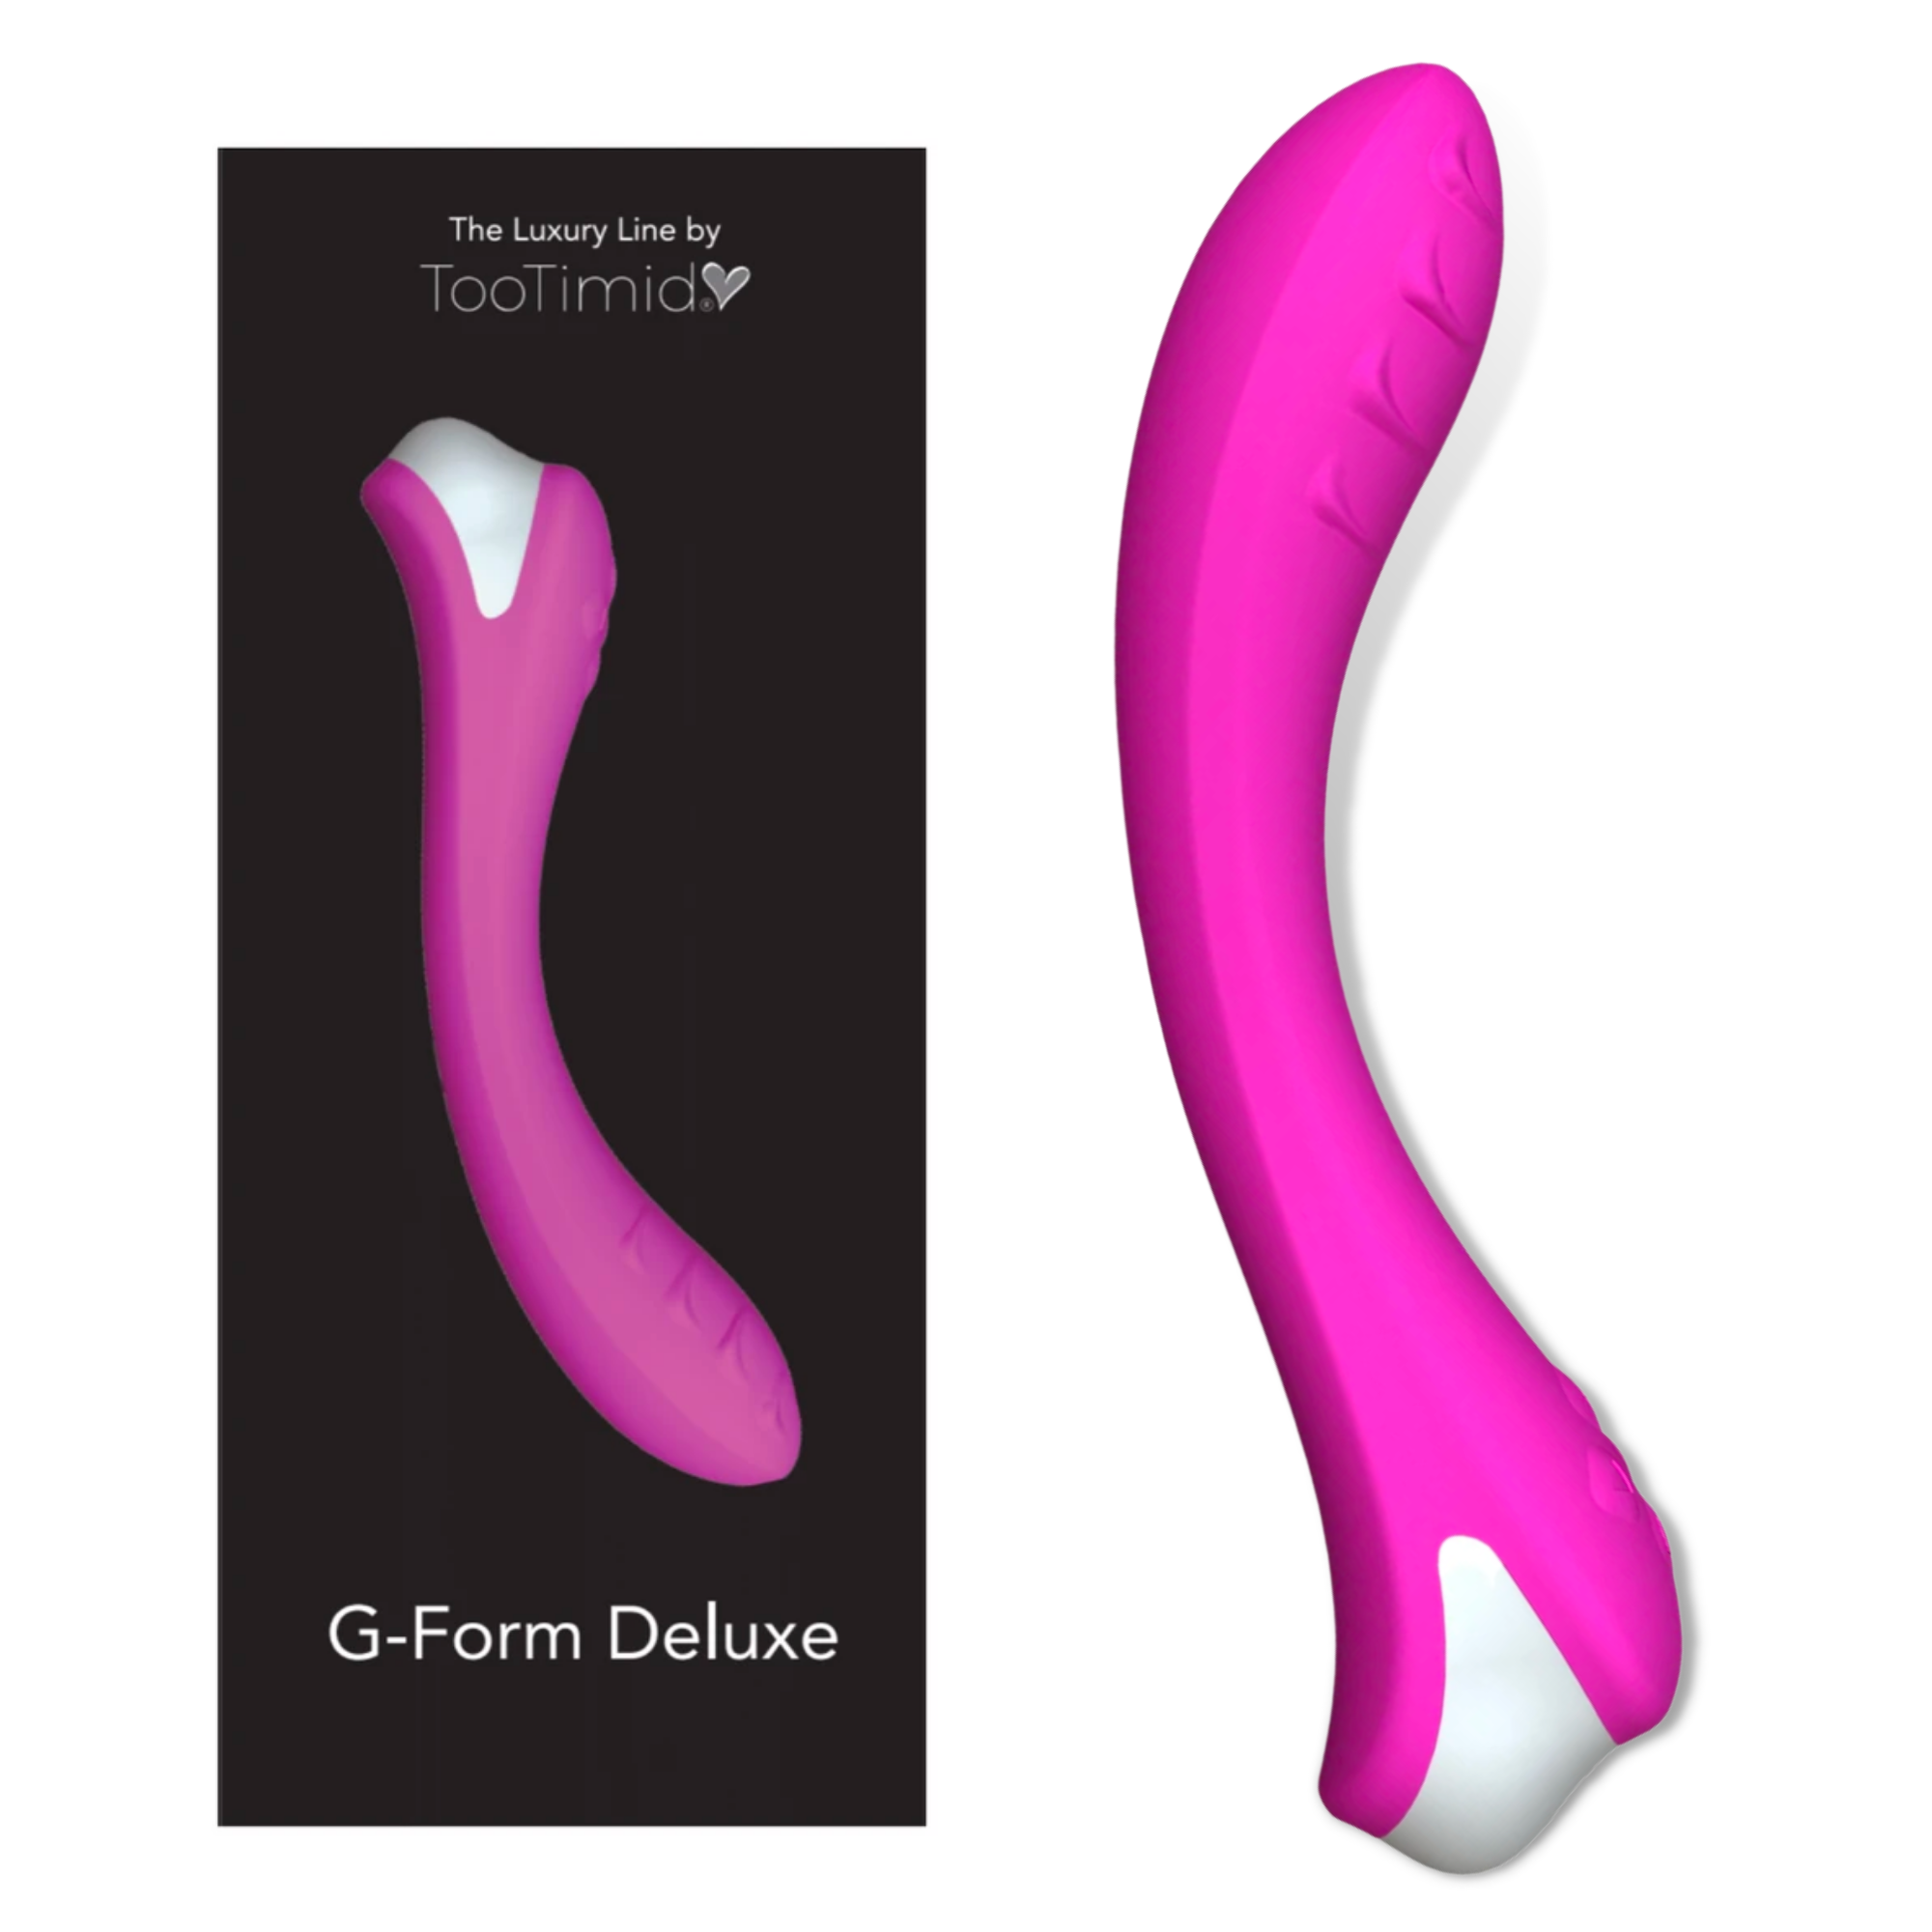 Rechargeable Silicone G-Spot Vibrator Luxury Sex Toys pic